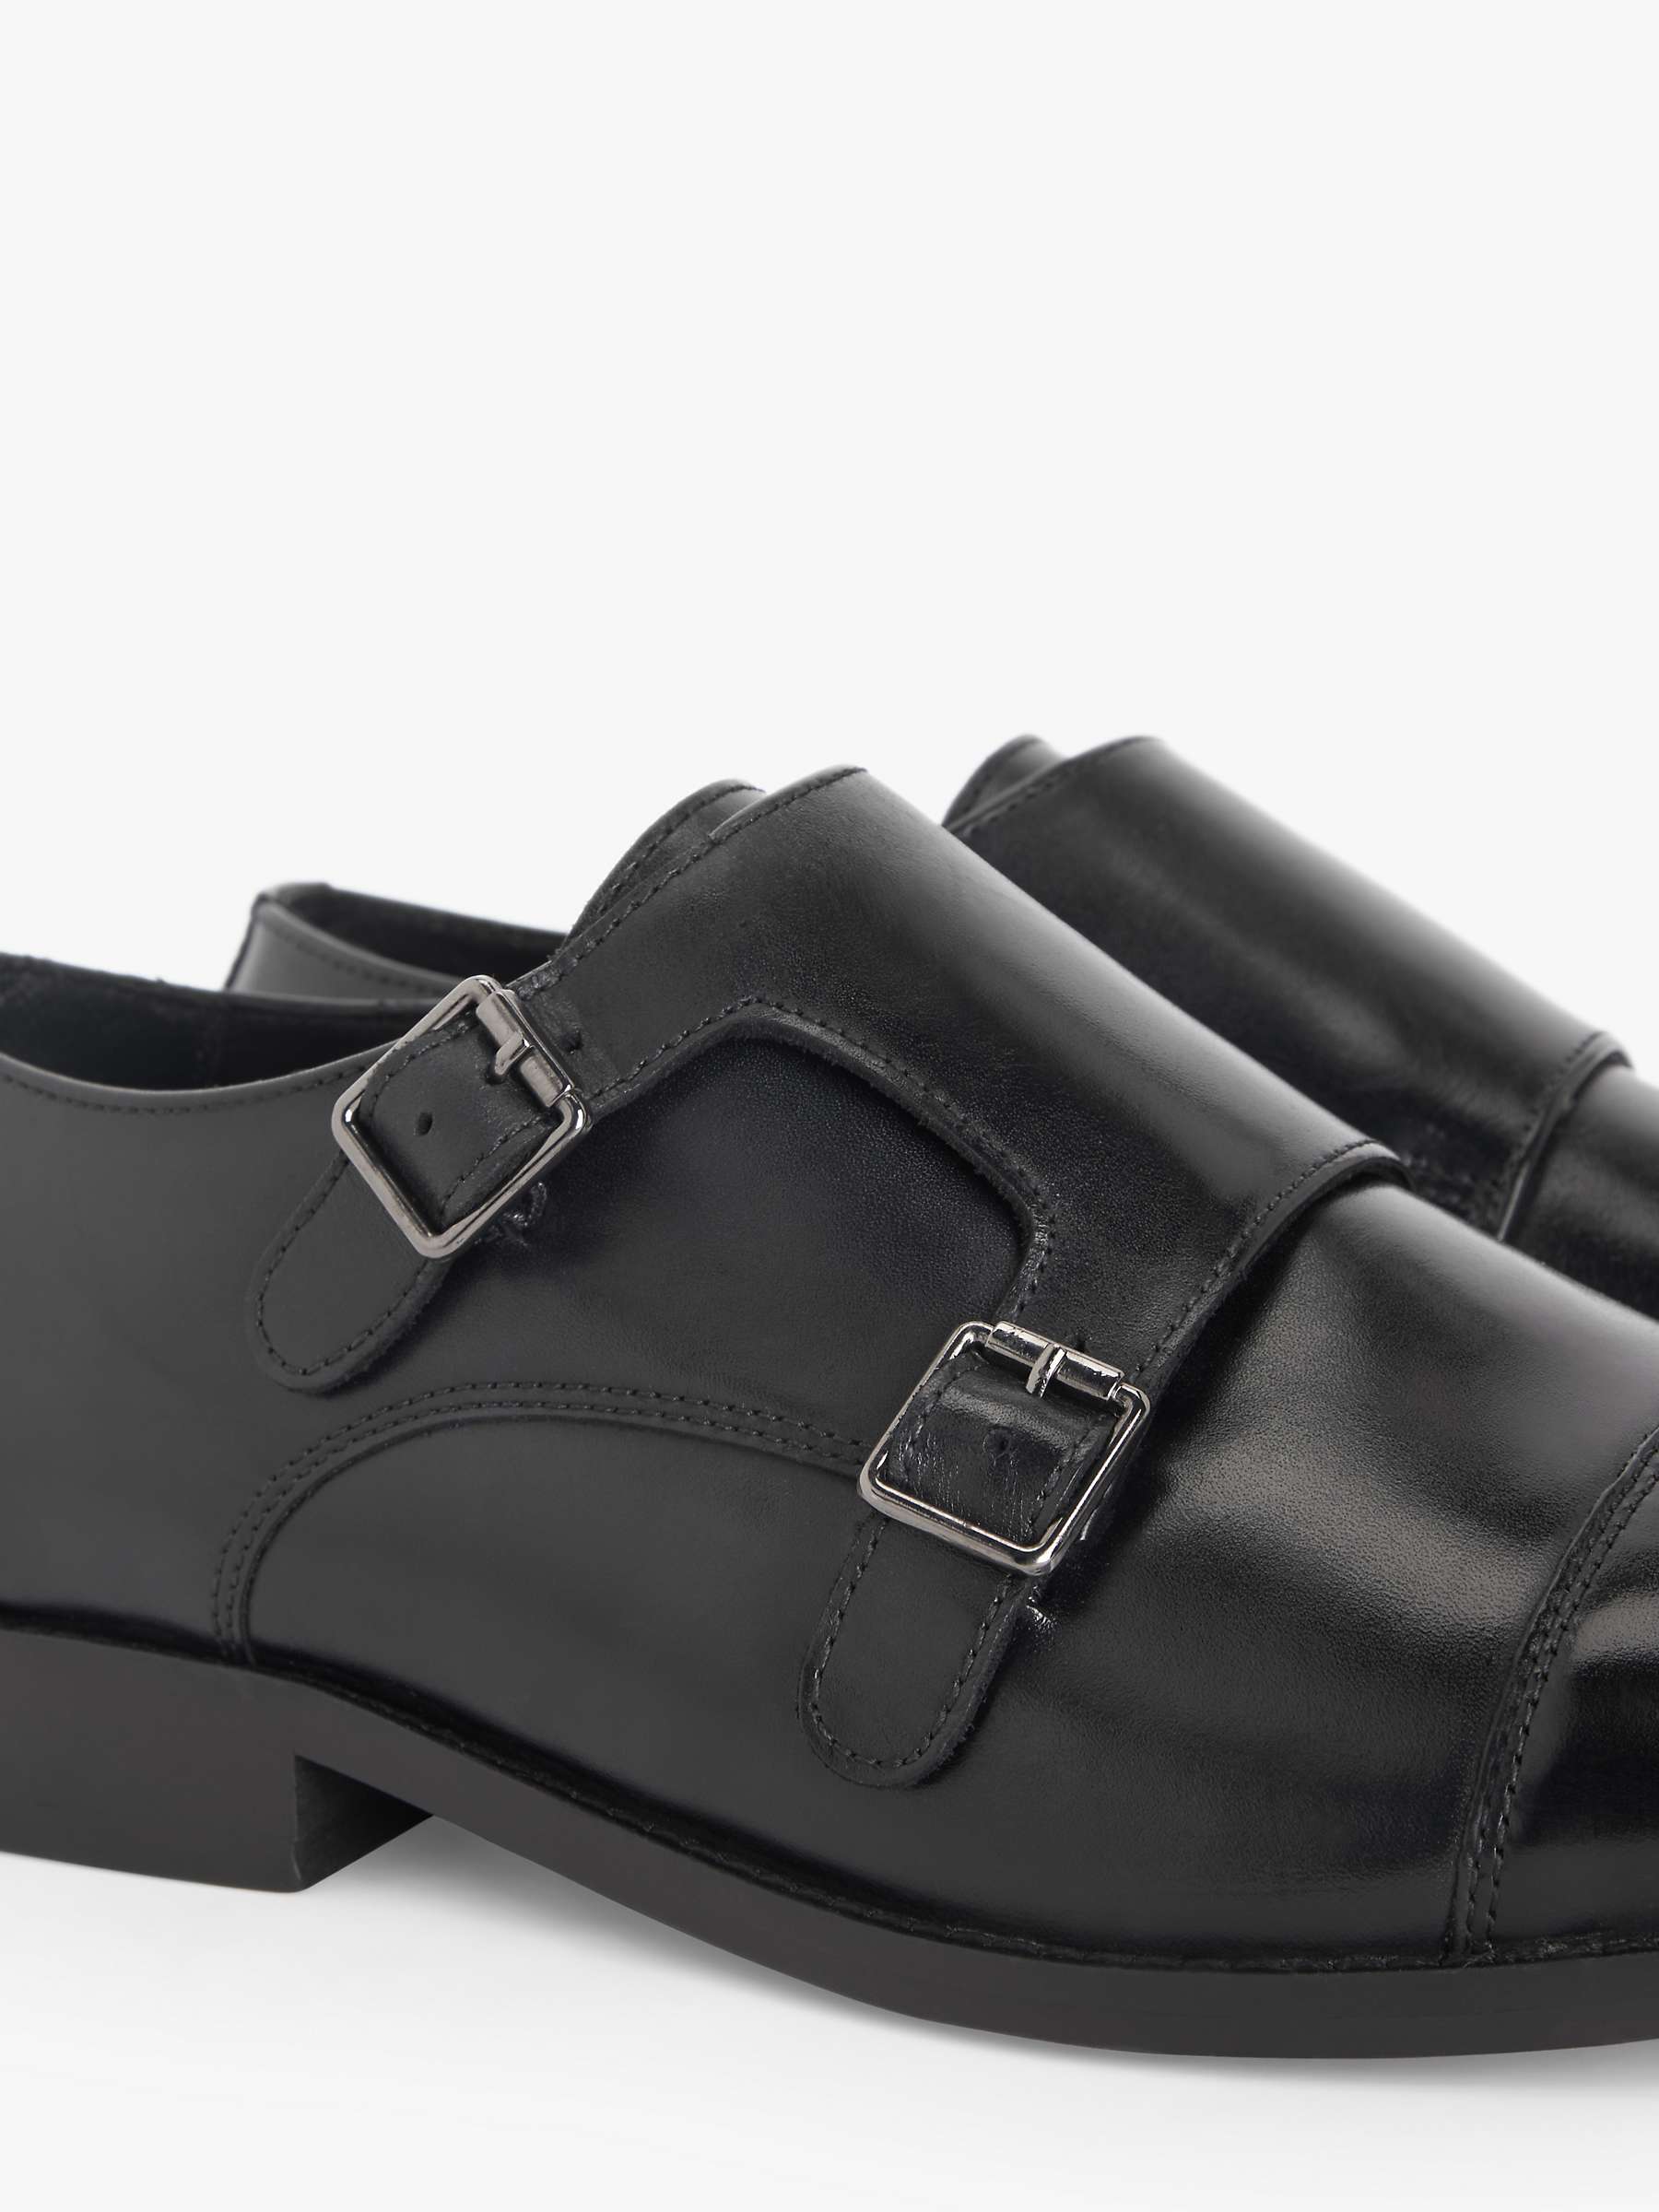 Buy John Lewis Double Strap Leather Monk Shoes Online at johnlewis.com